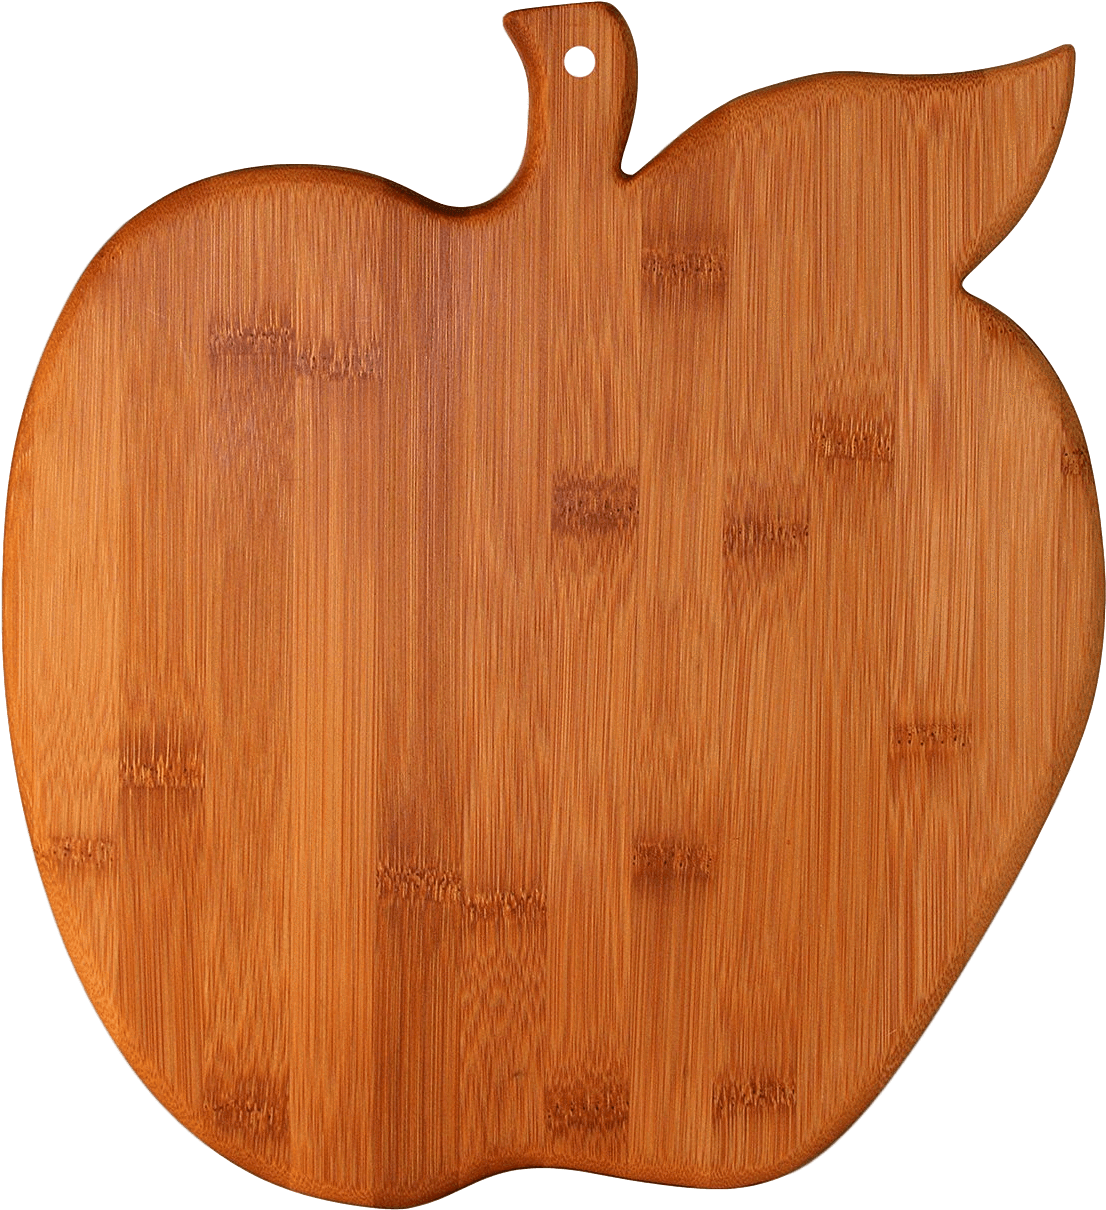 Wooden Apple Shaped Cutting Board PNG